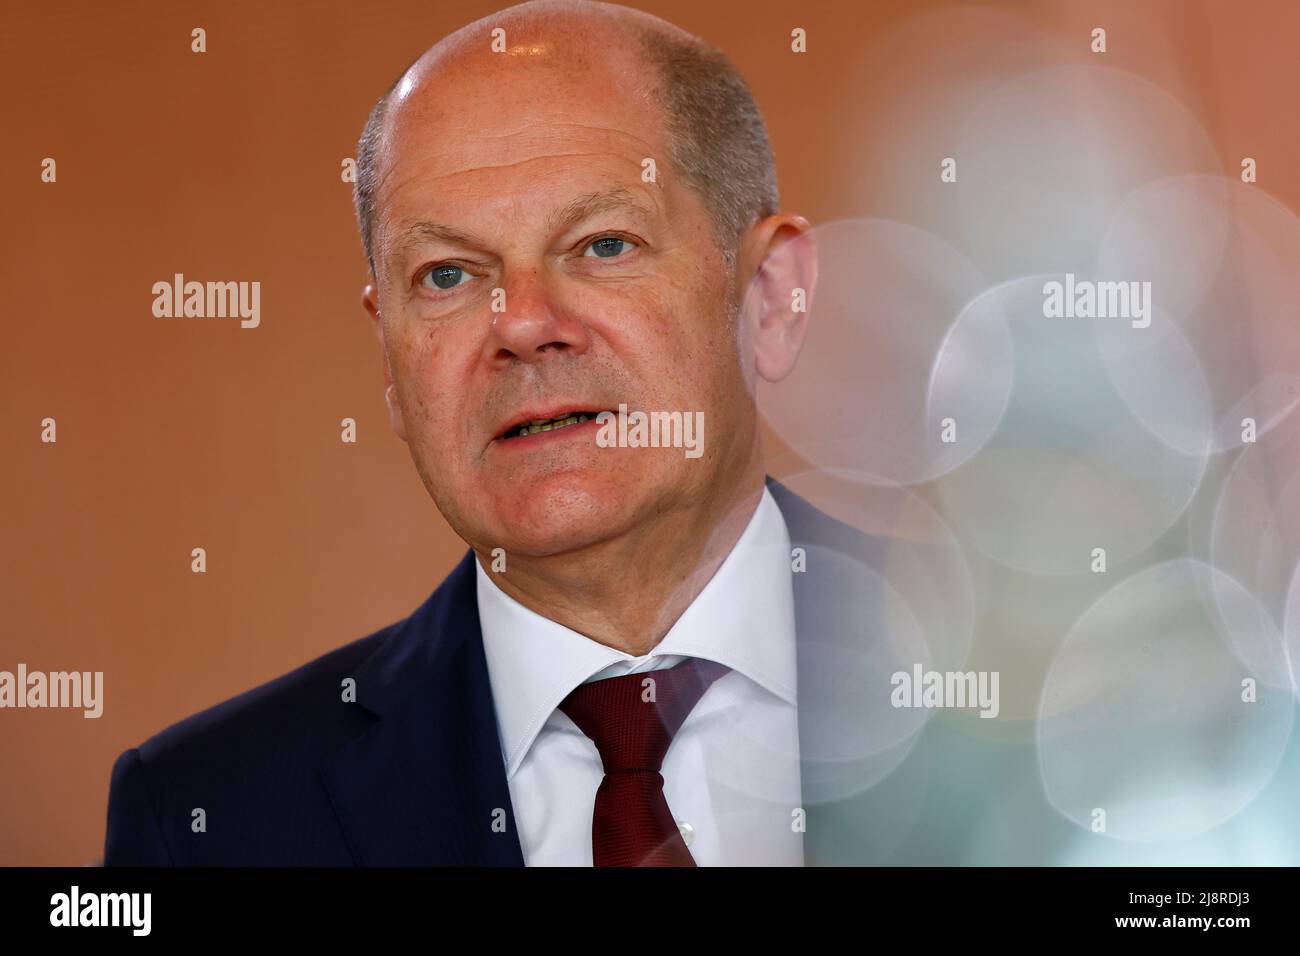 Germany's Chancellor Olaf Scholz arrives for the weekly cabinet meeting session in the German Federal Chancellery in Berlin, Germany May 18, 2022. REUTERS/Hannibal Hanschke Stock Photo